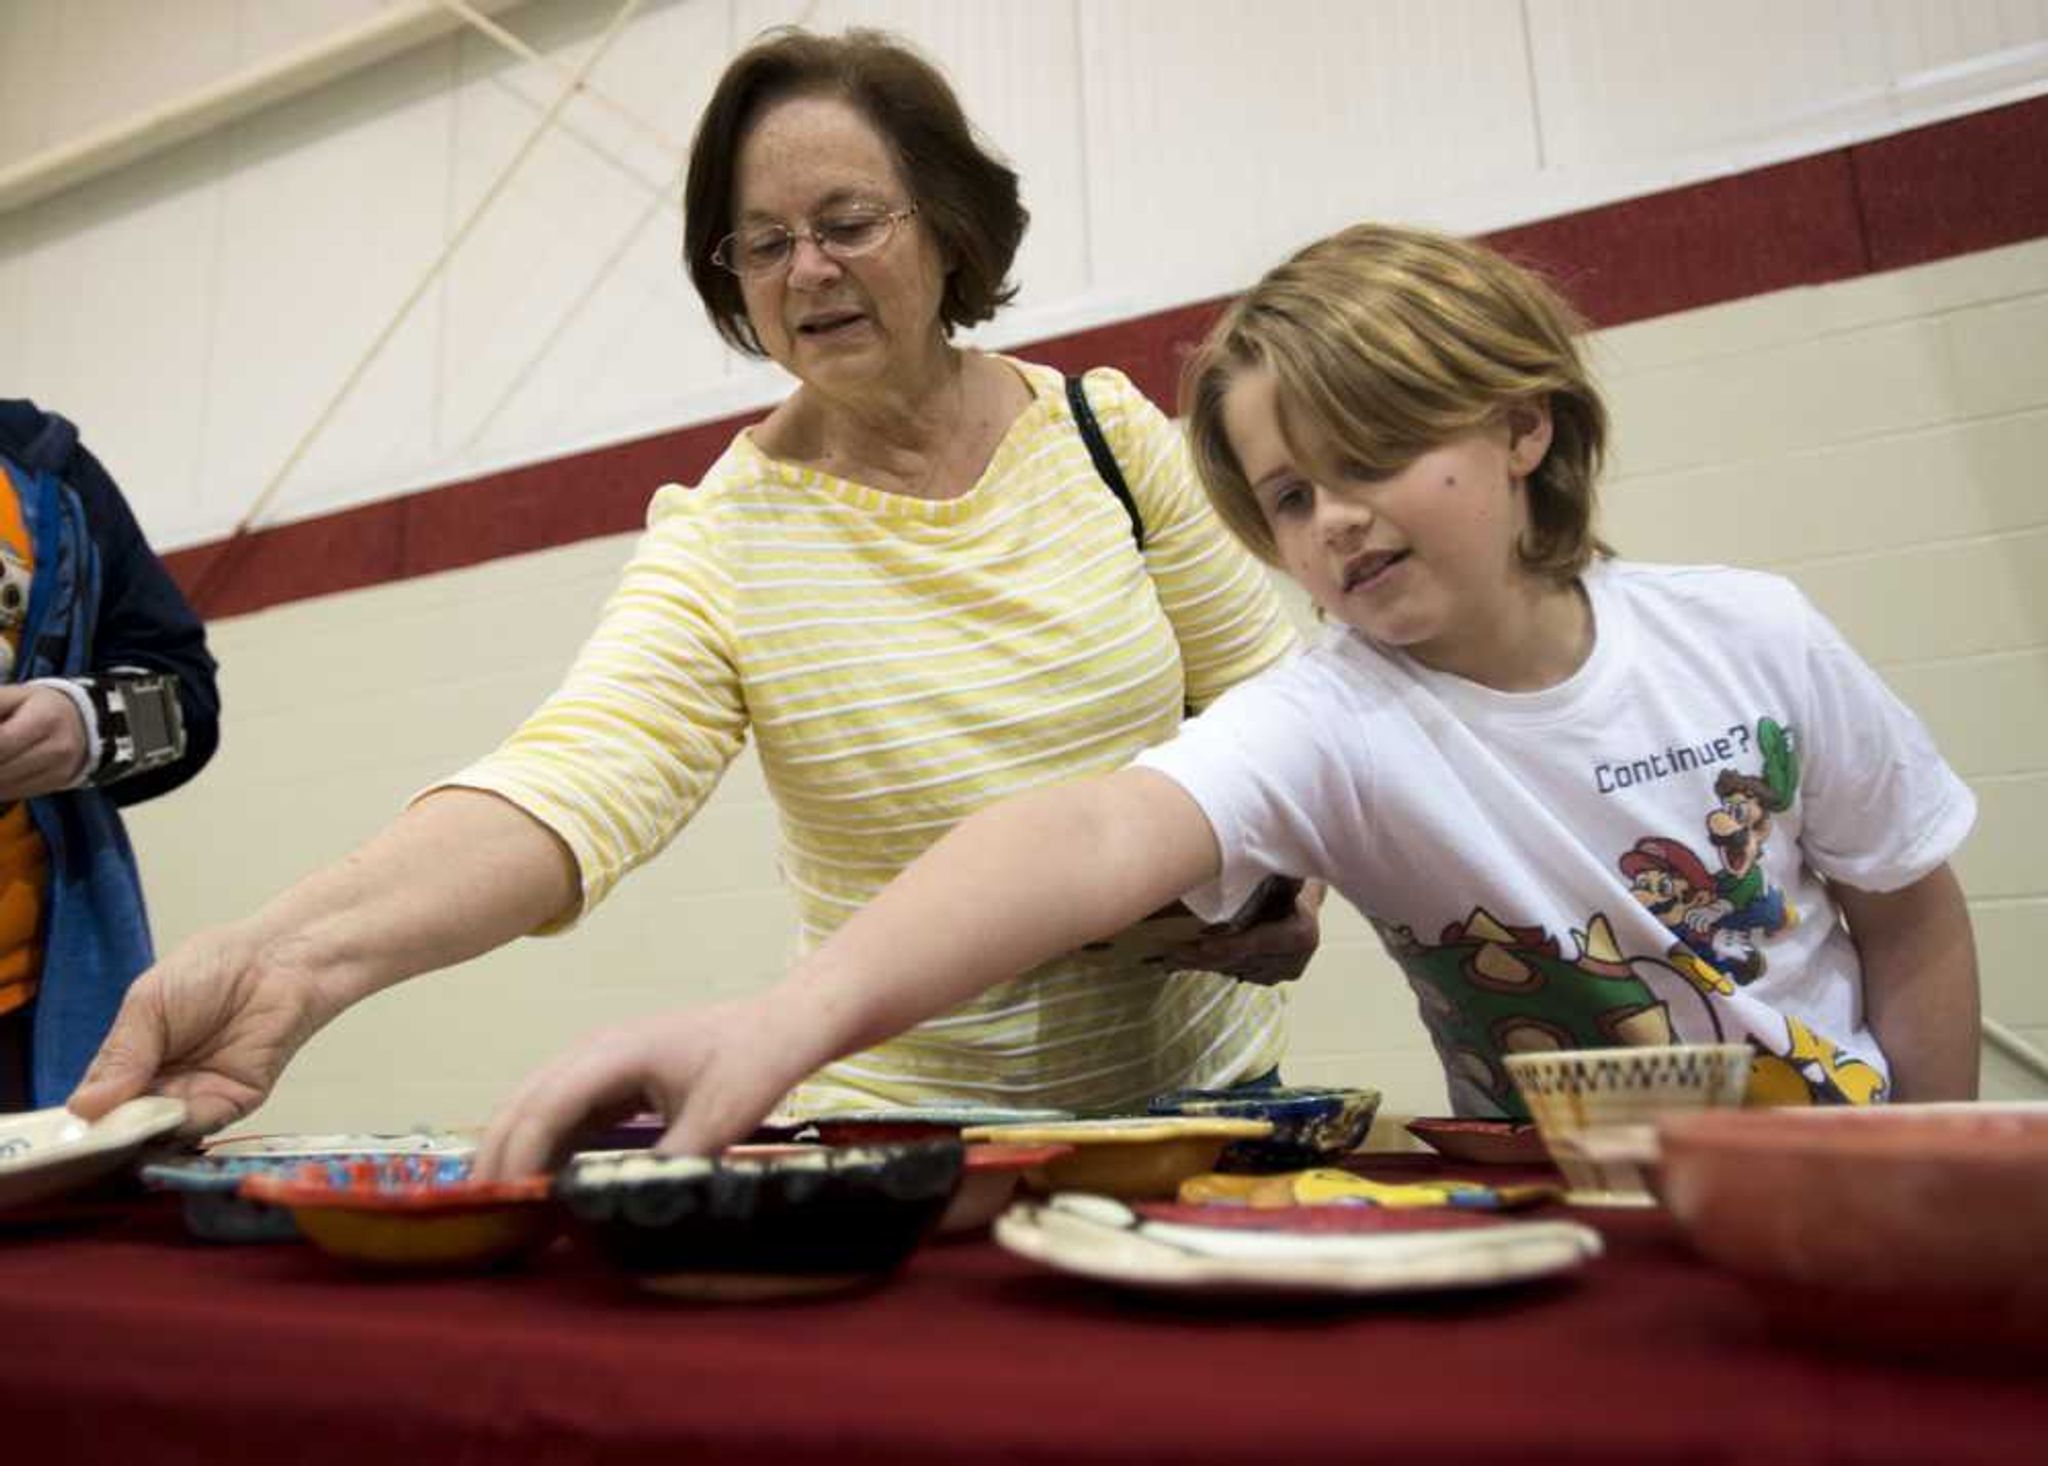 Bradyn Jaster, 8, looks at decorative bowls with his grandmother, Avon Crocker, during the Empty Bowls Banquet on Sunday.